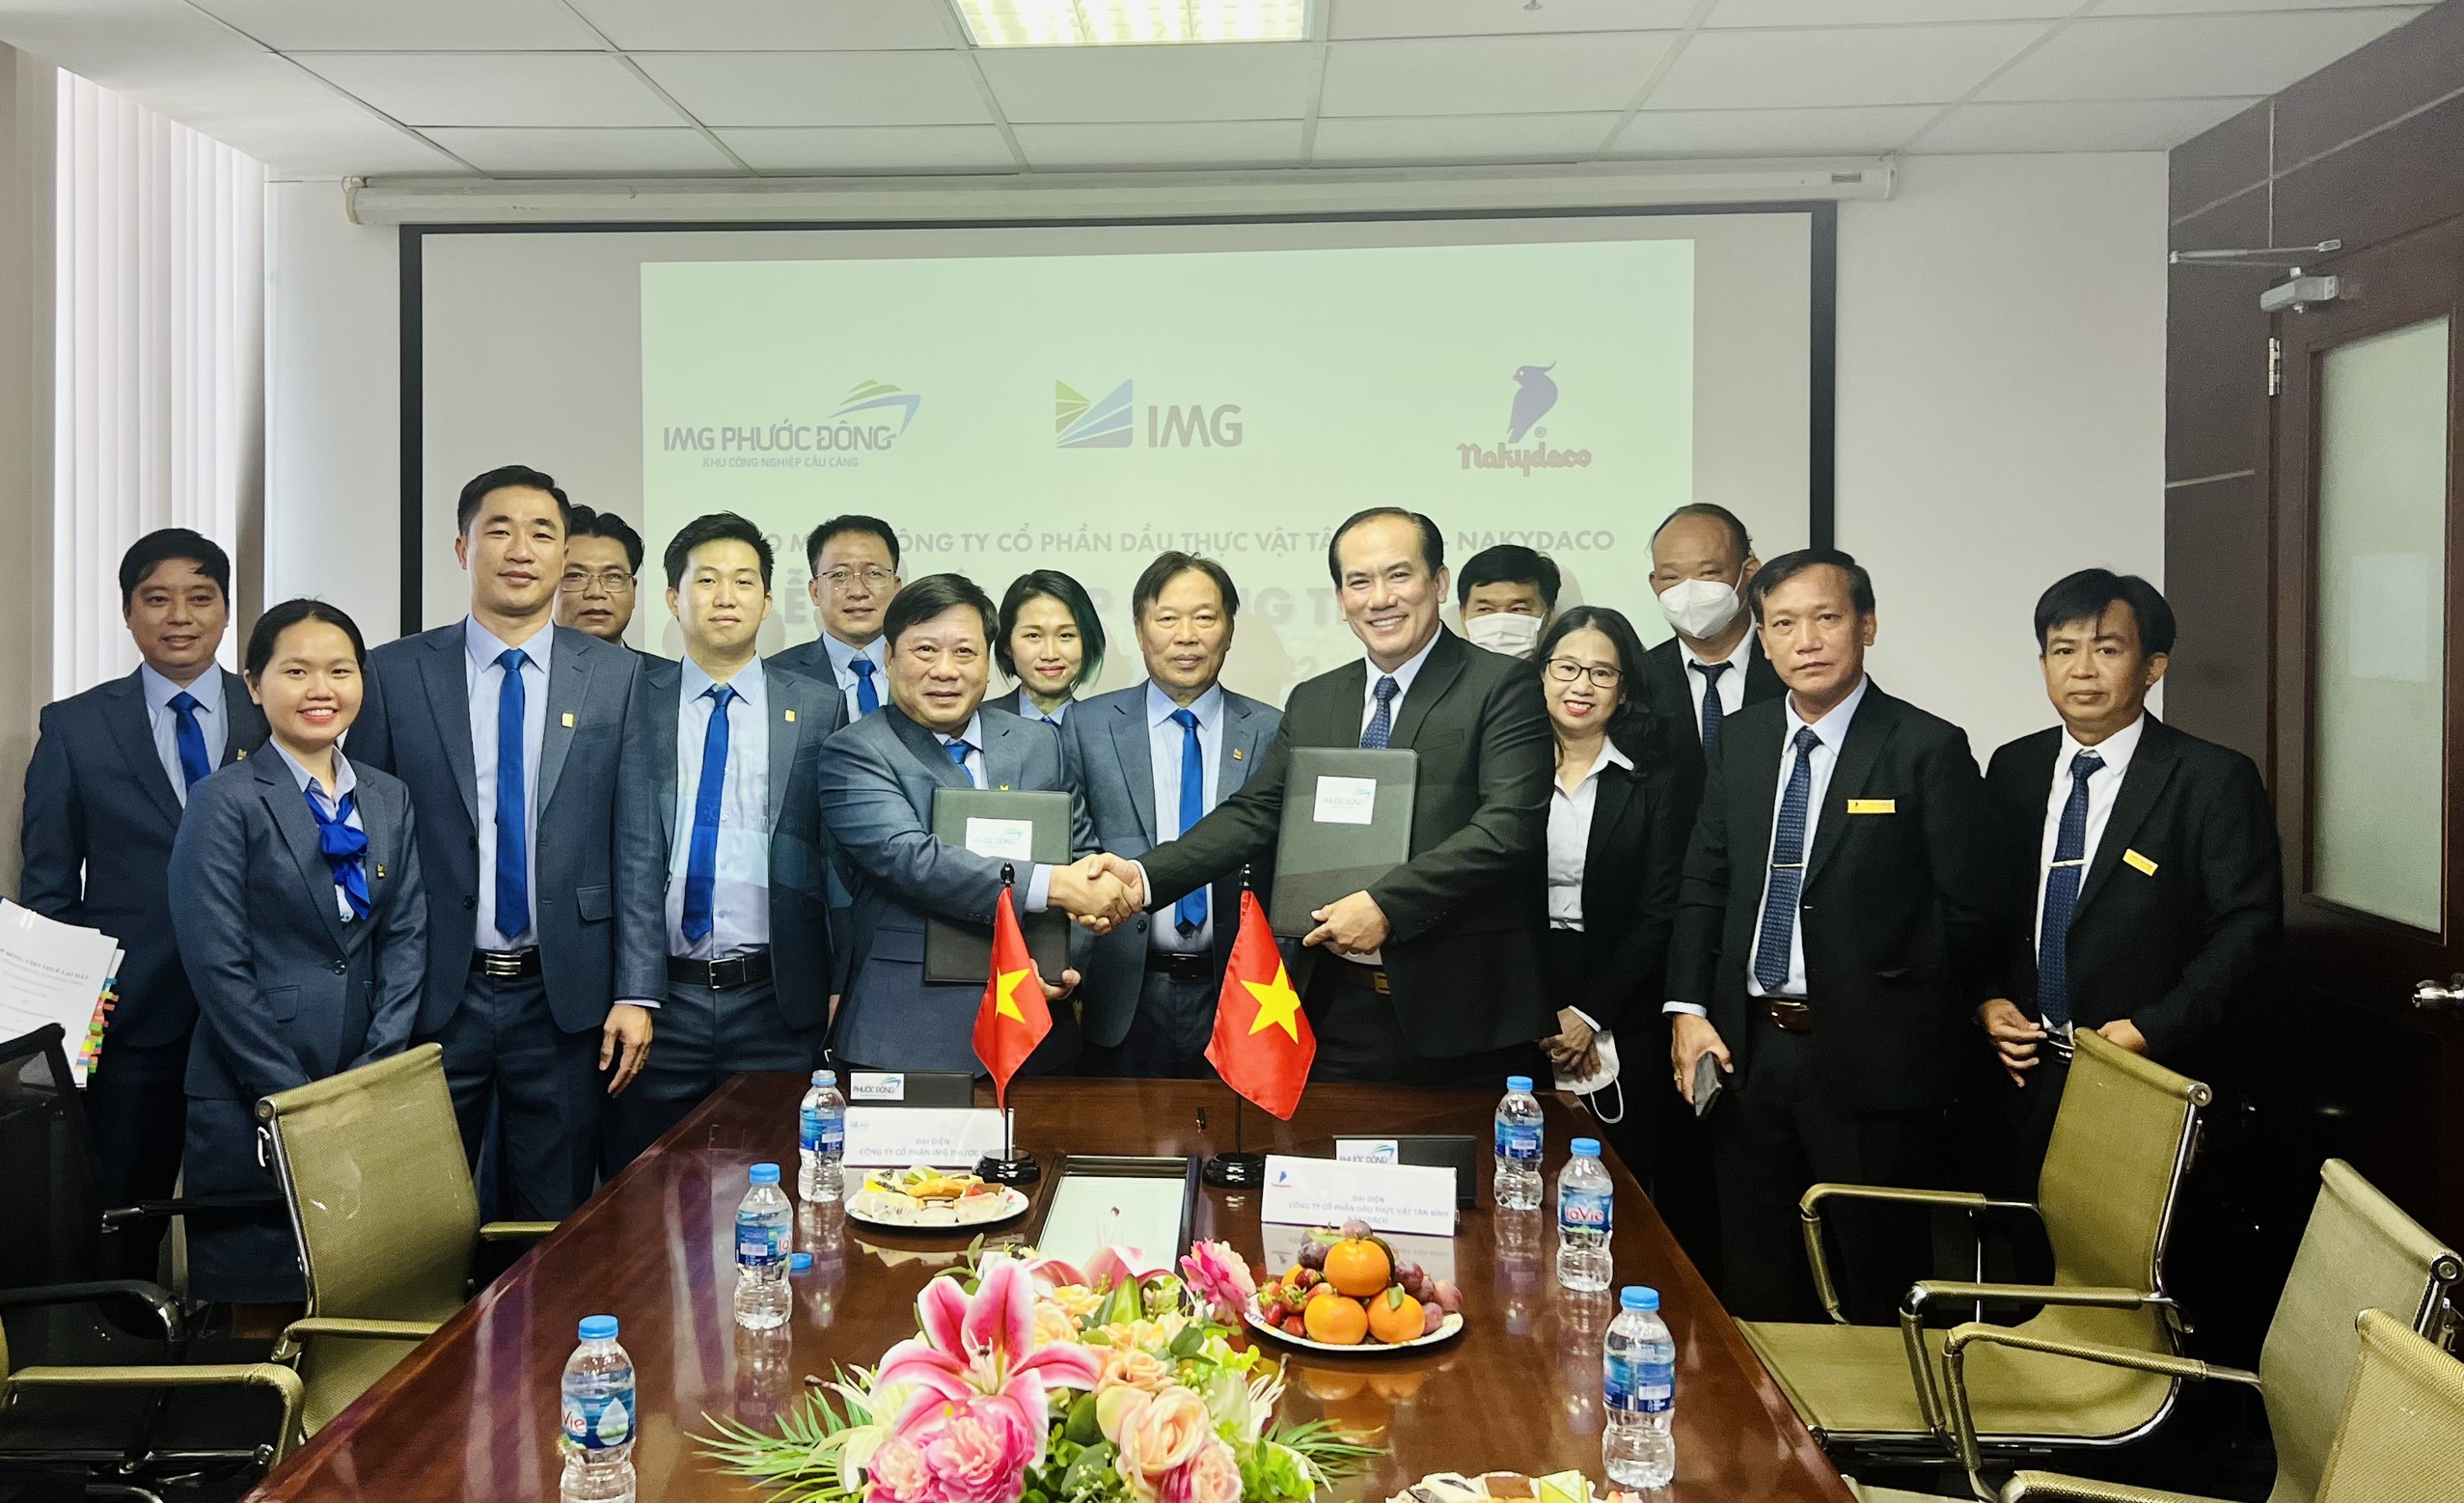 signing ceremony of land lease contract between img phuoc dong jsc and tan binh vegetable oil jsc  nakydaco